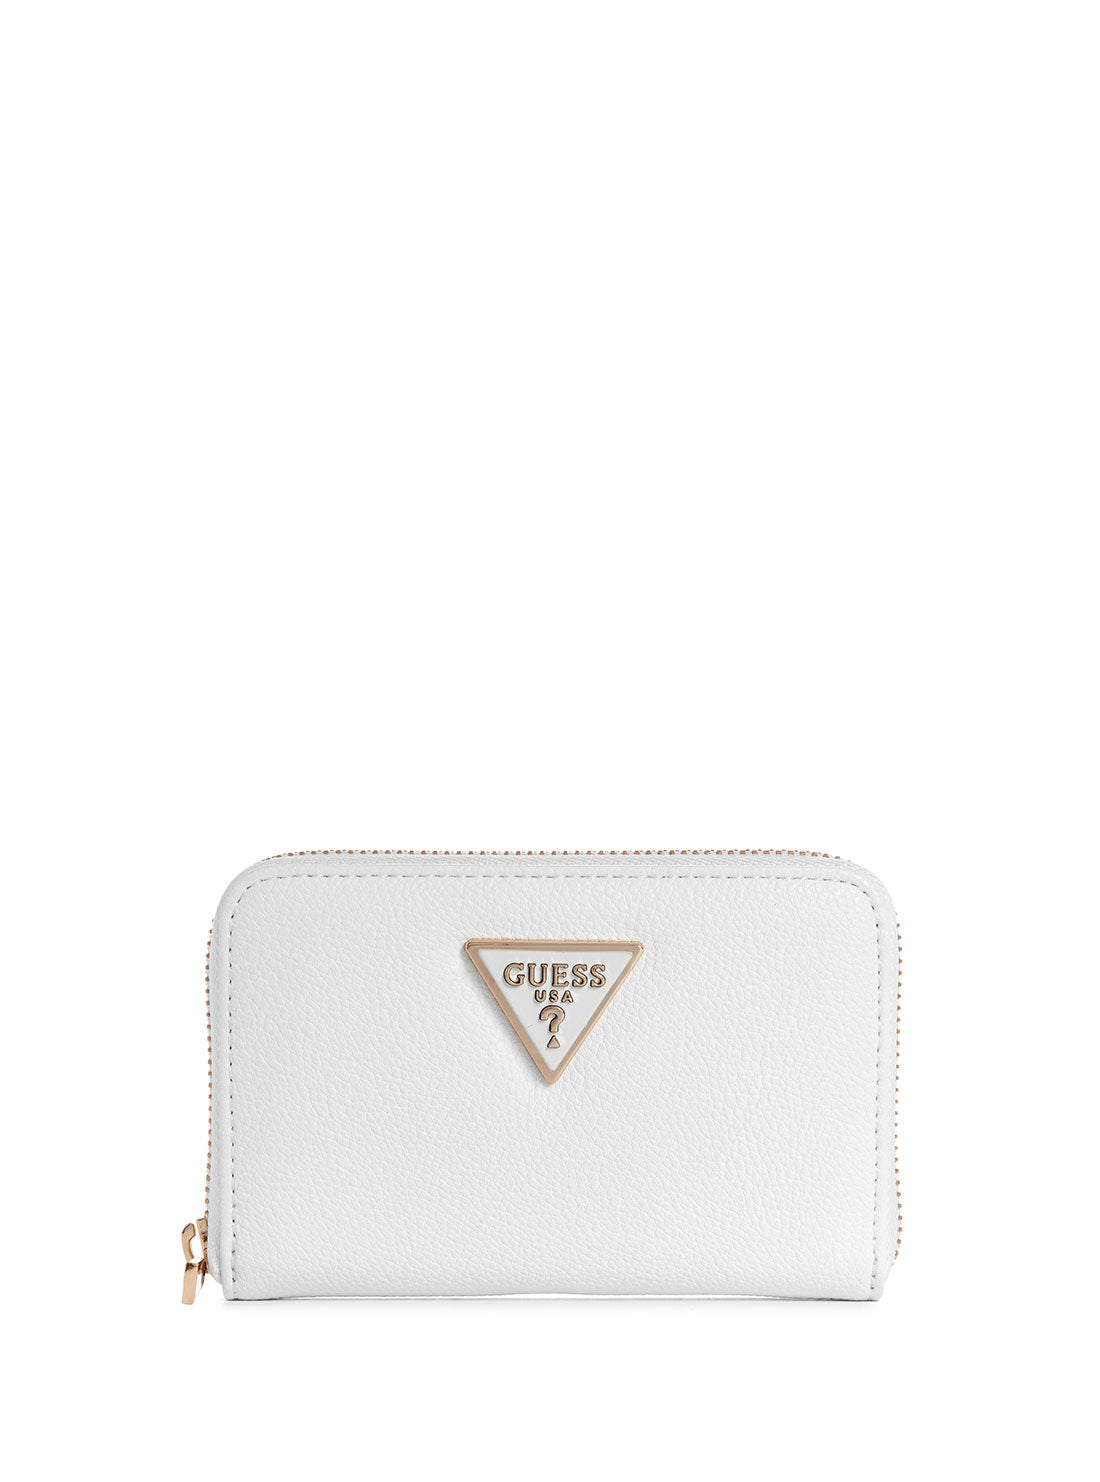 GUESS White Meridian Medium Wallet front view